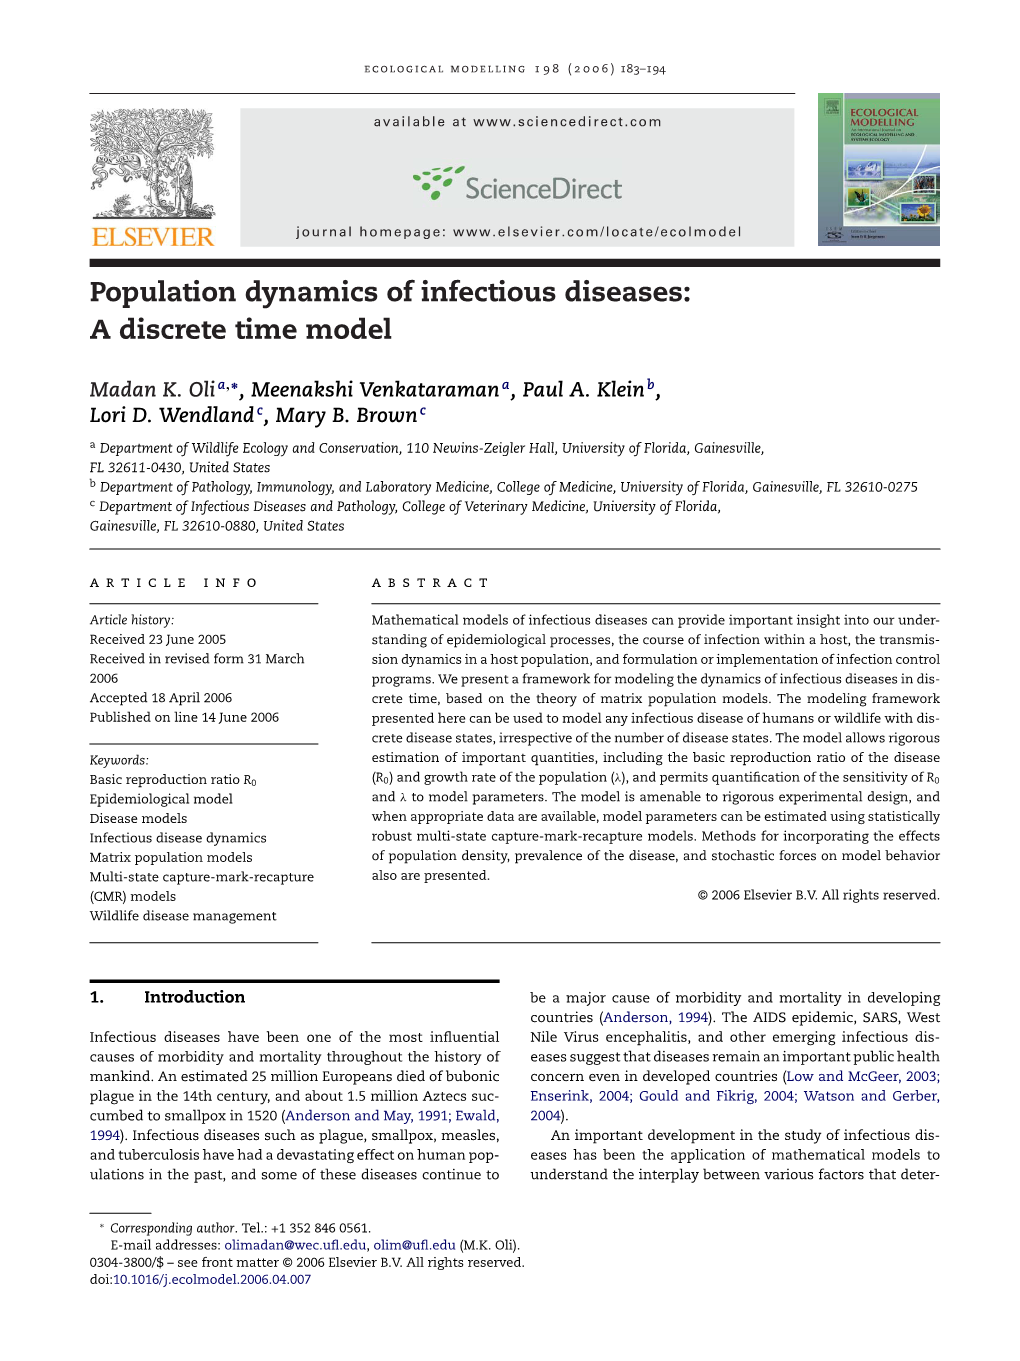 Population Dynamics of Infectious Diseases: a Discrete Time Model